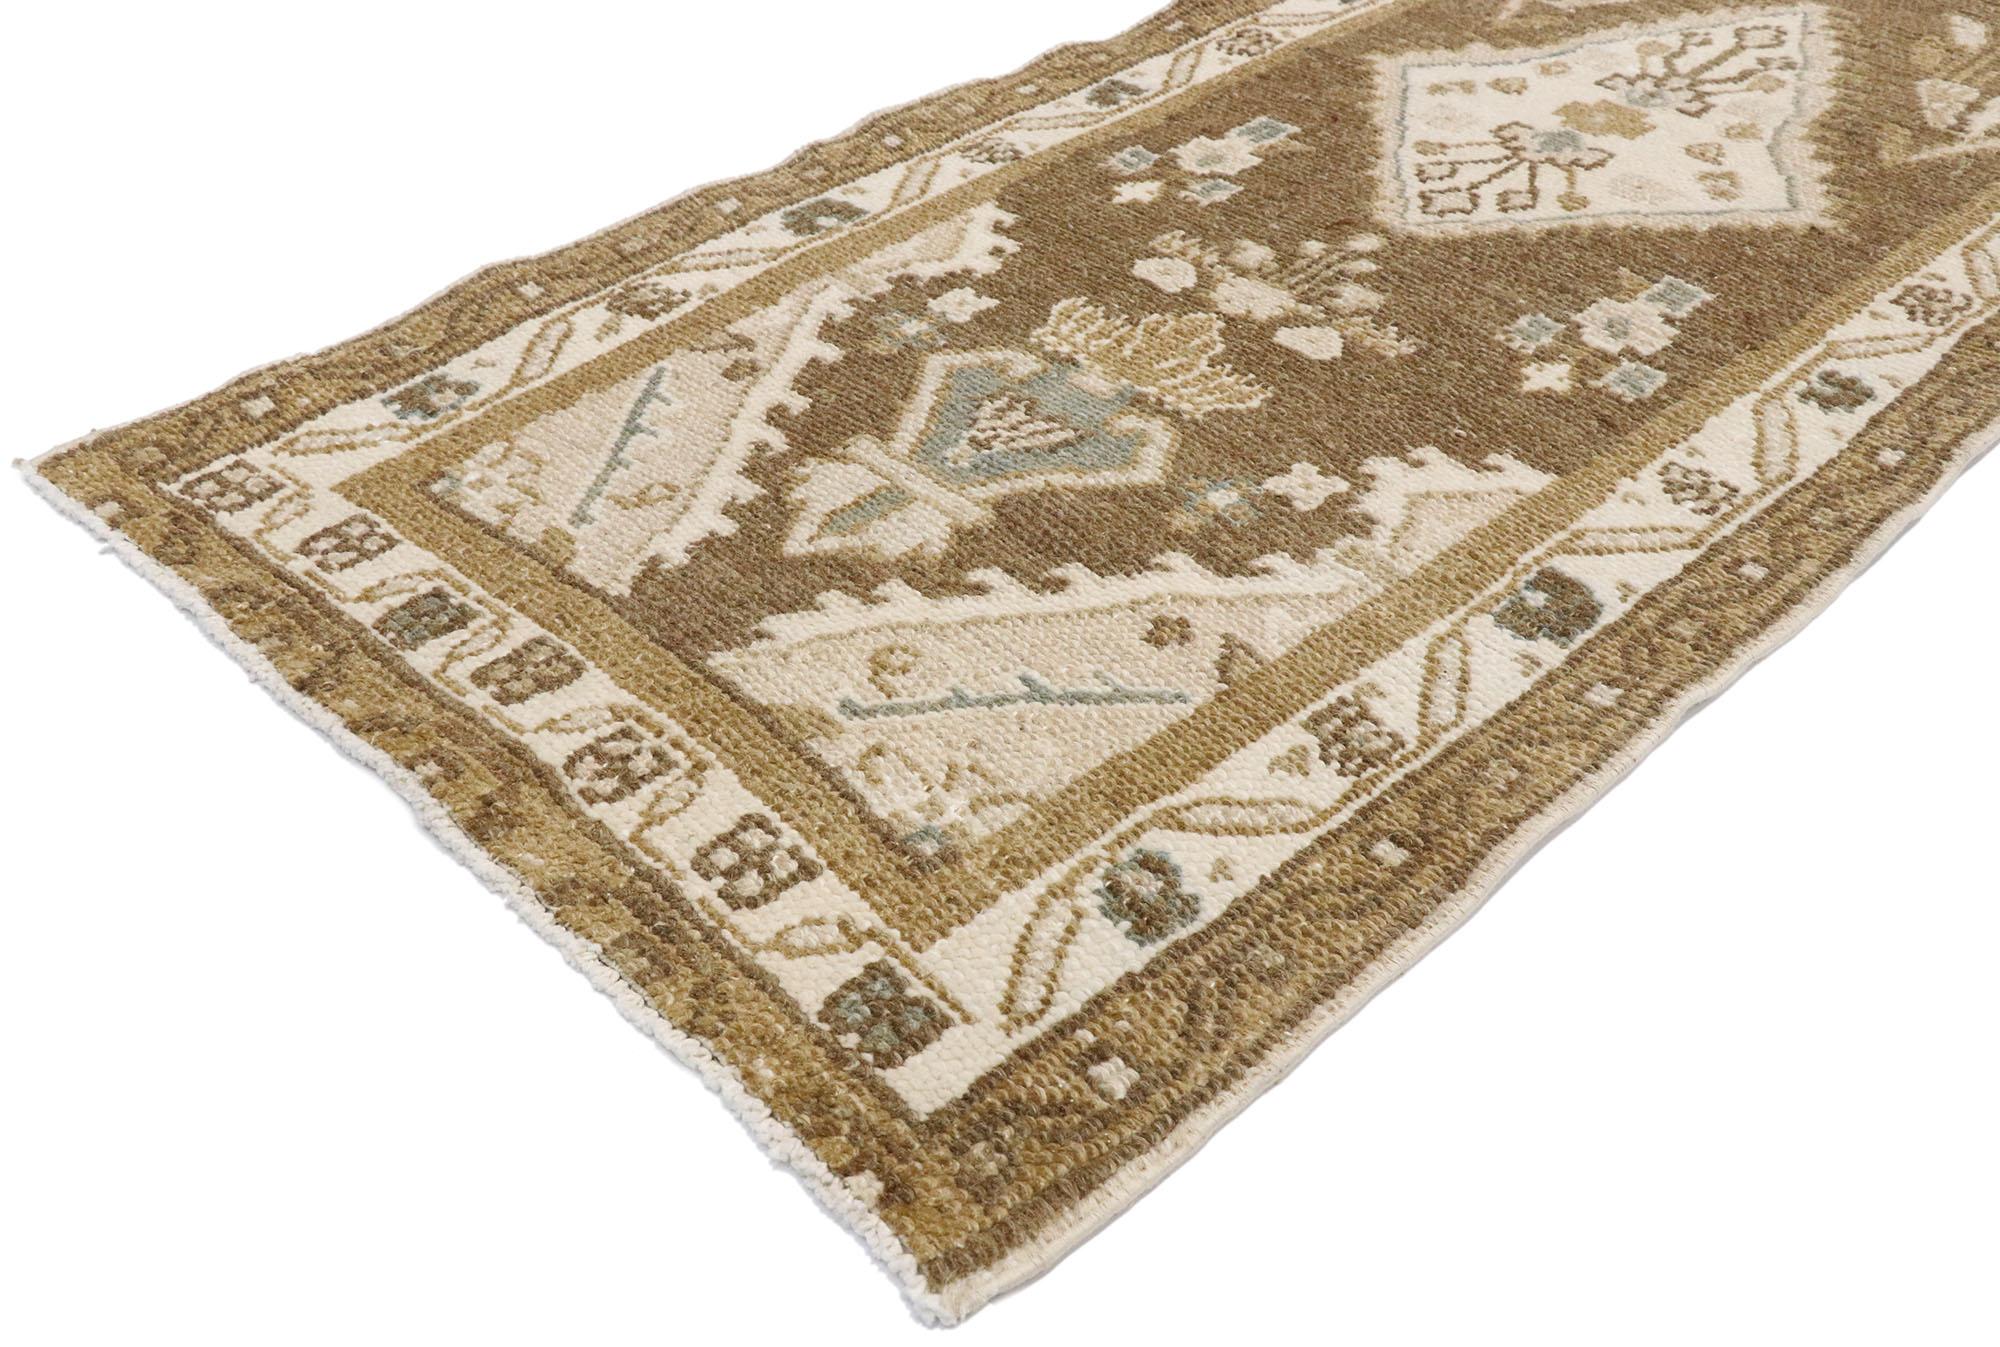 53467, vintage Persian Hamadan runner with Romantic Russian Dacha style. Take a timeless, tailored design, mix in a dash of romantic connotations and neutral hues to get this fresh look that’s as comfortable as it is chic. Soft, bespoke vibes meet